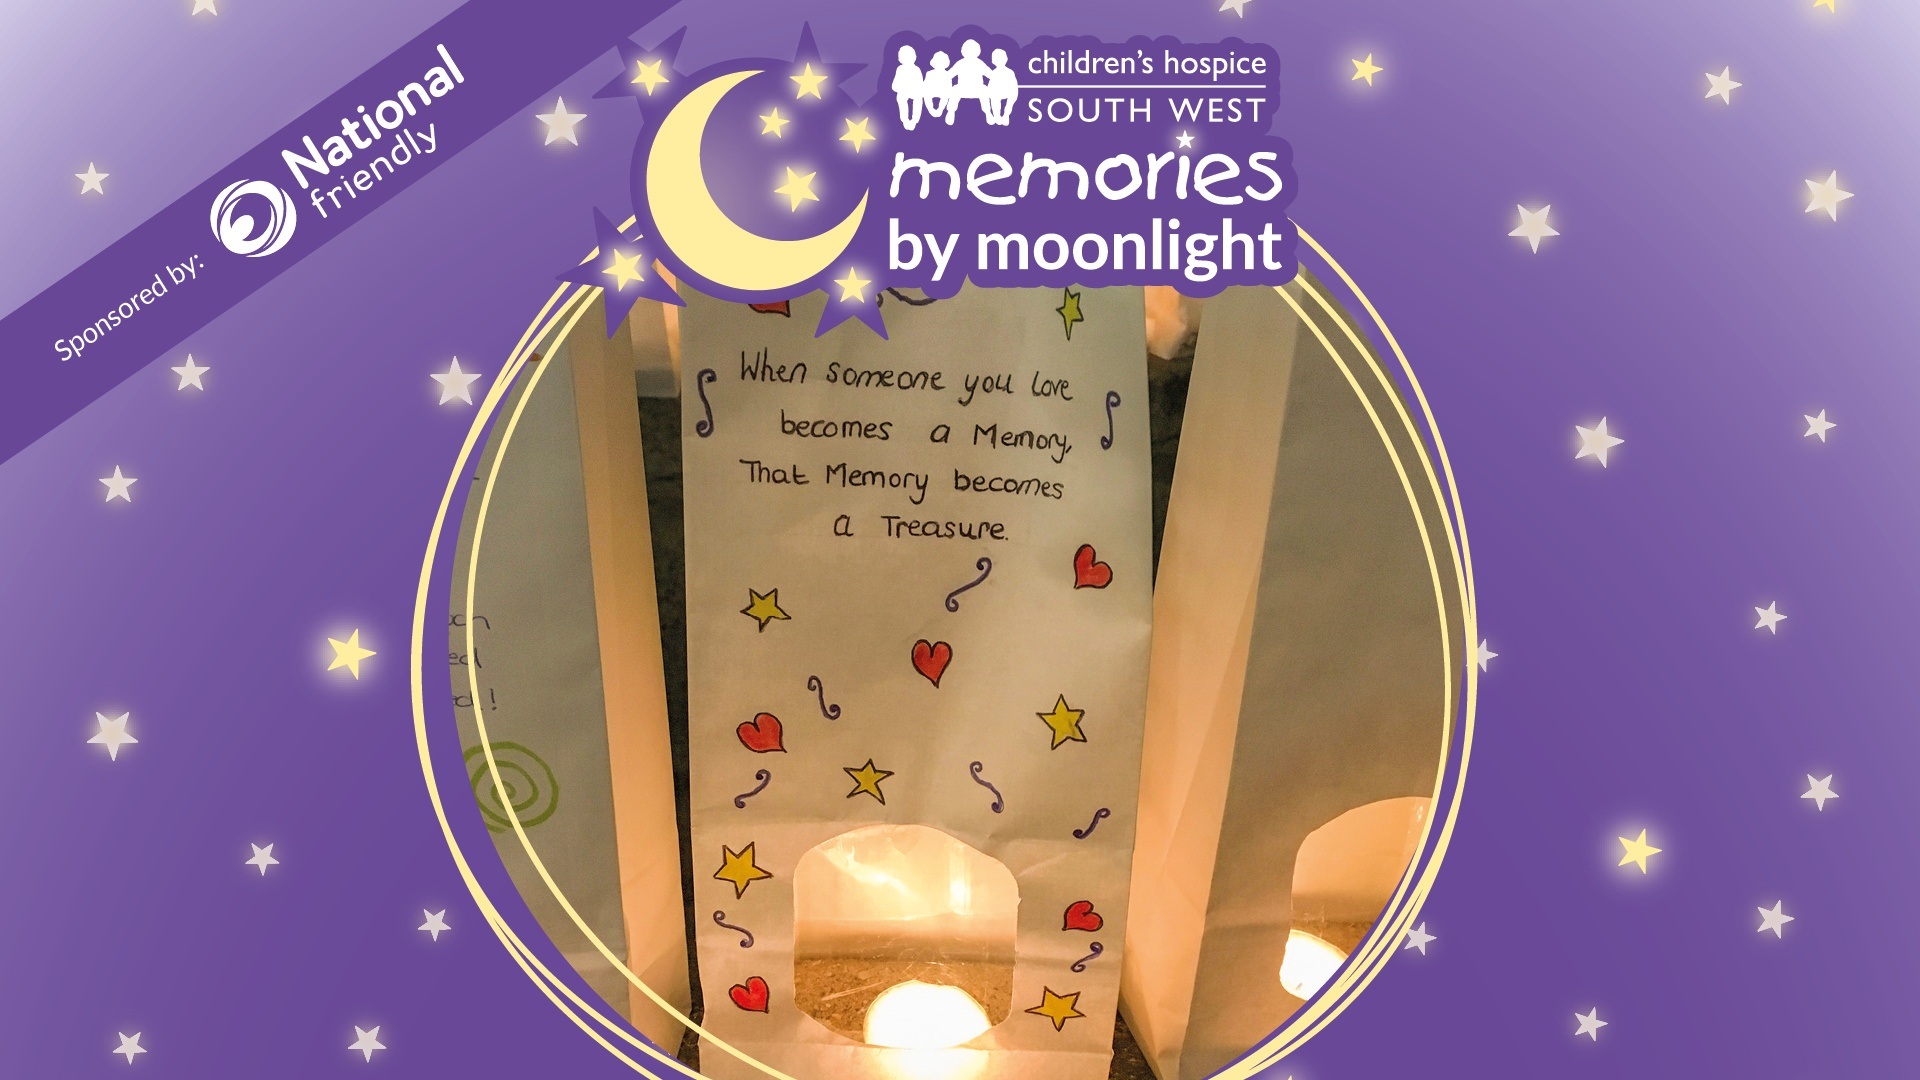 Memories by Moonlight is a chance to remember your loved ones